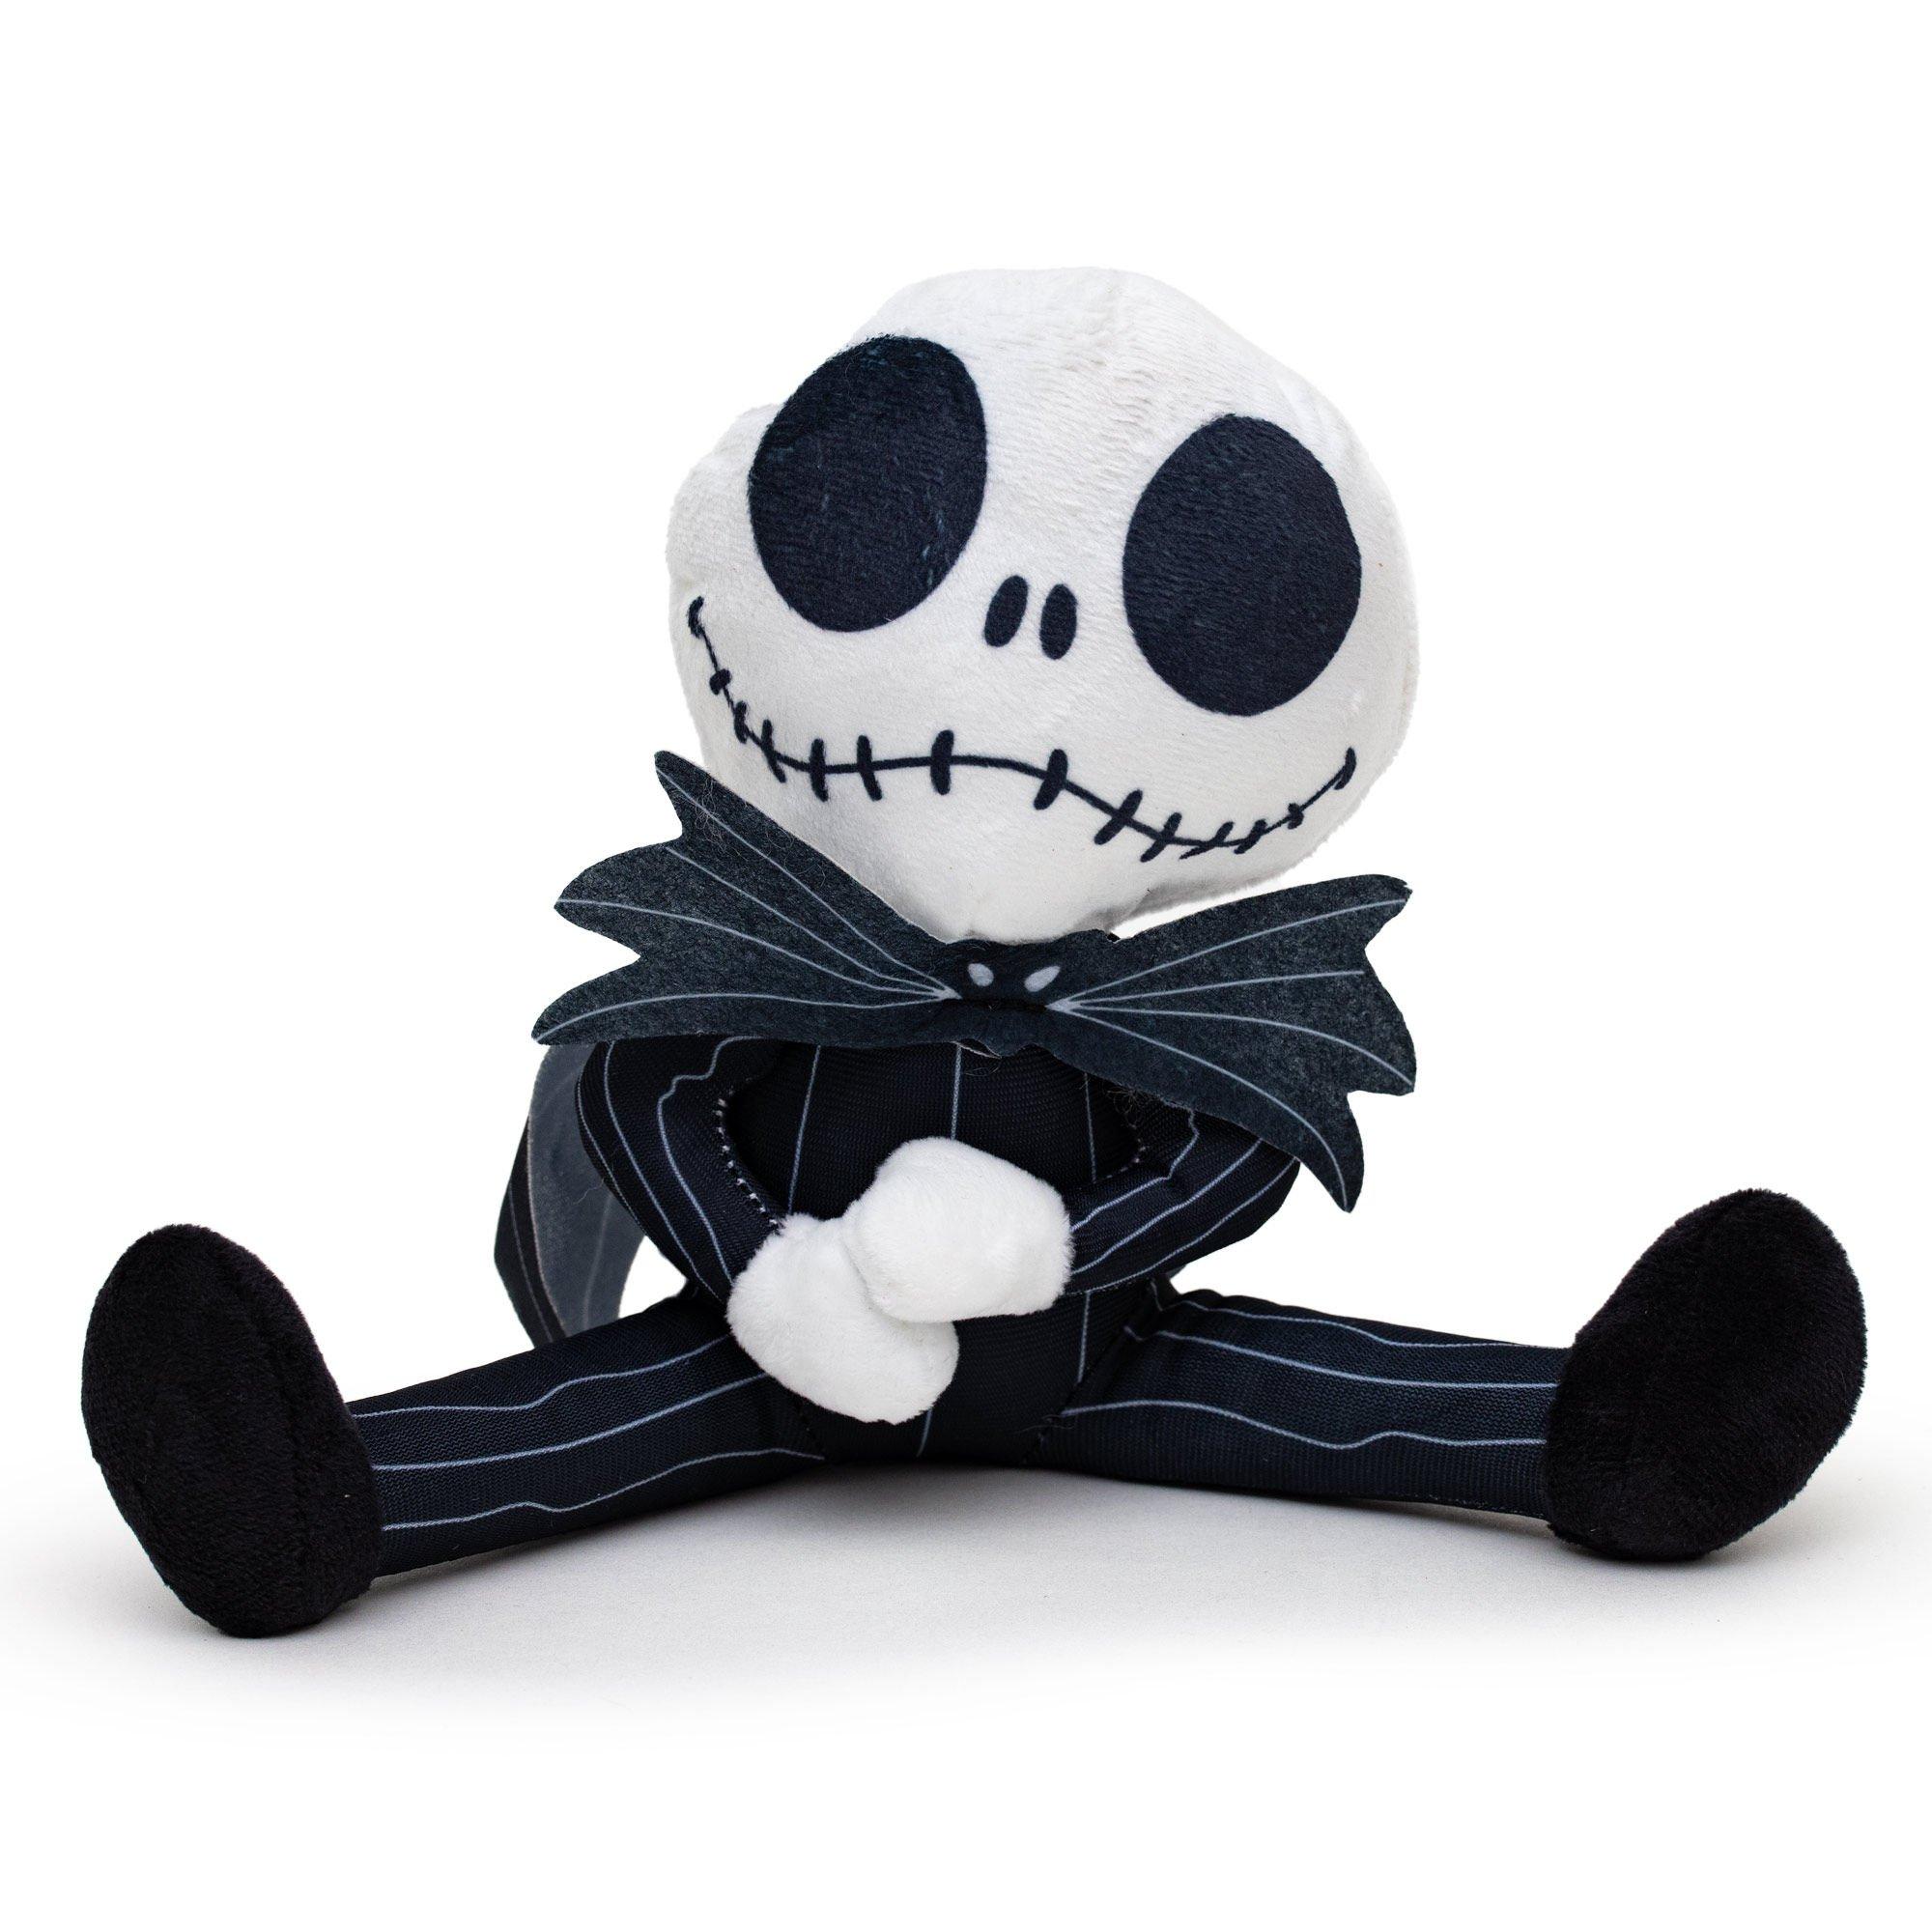 Buckle-Down Disney Nightmare Before Christmas Dog Toy Squeaker Plush Toy Jack